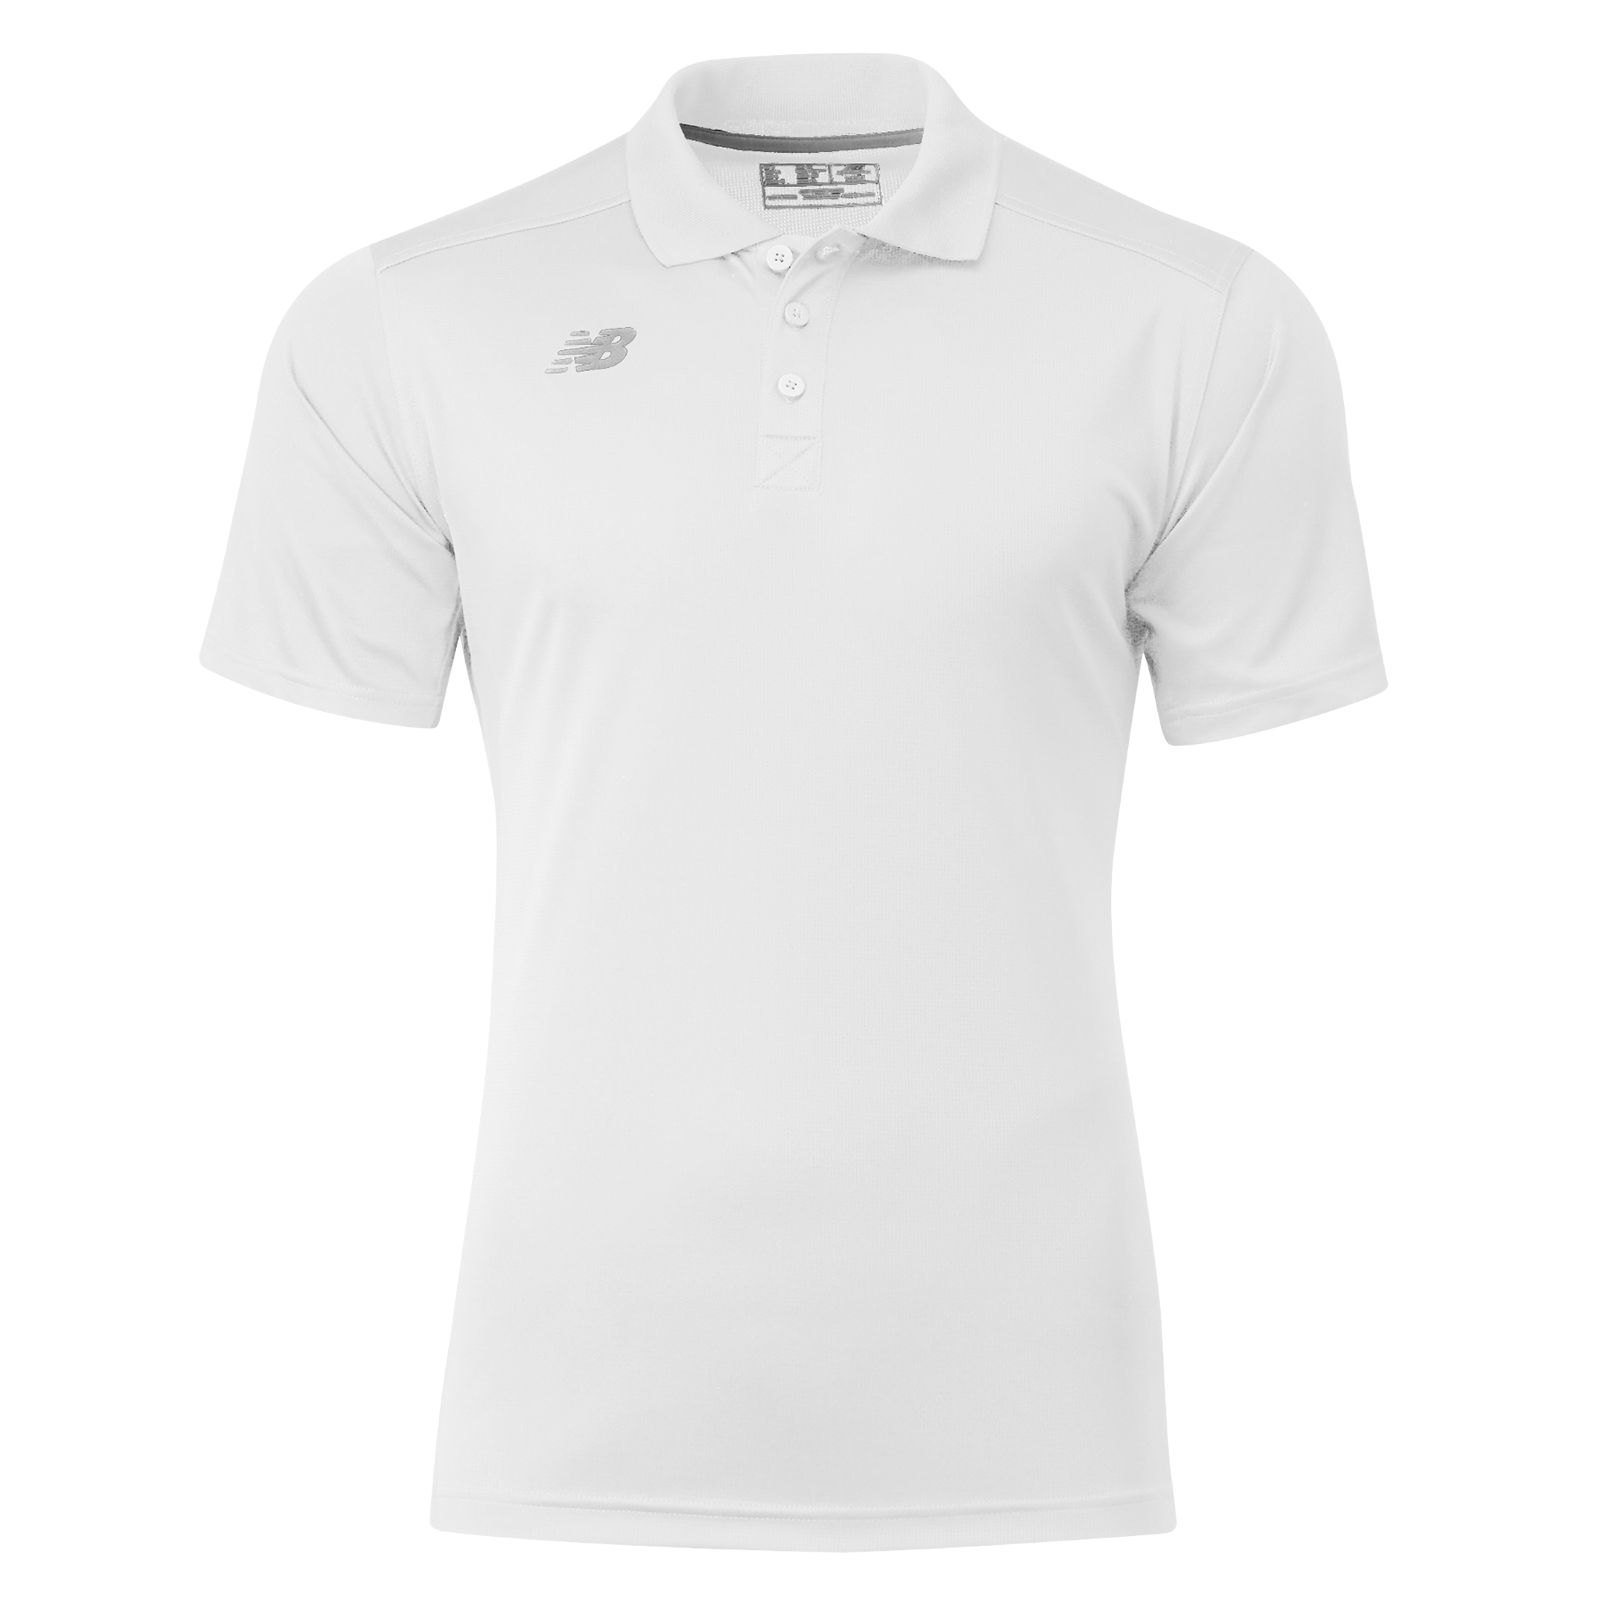 Men's Performance Tech Polo, White image number 0